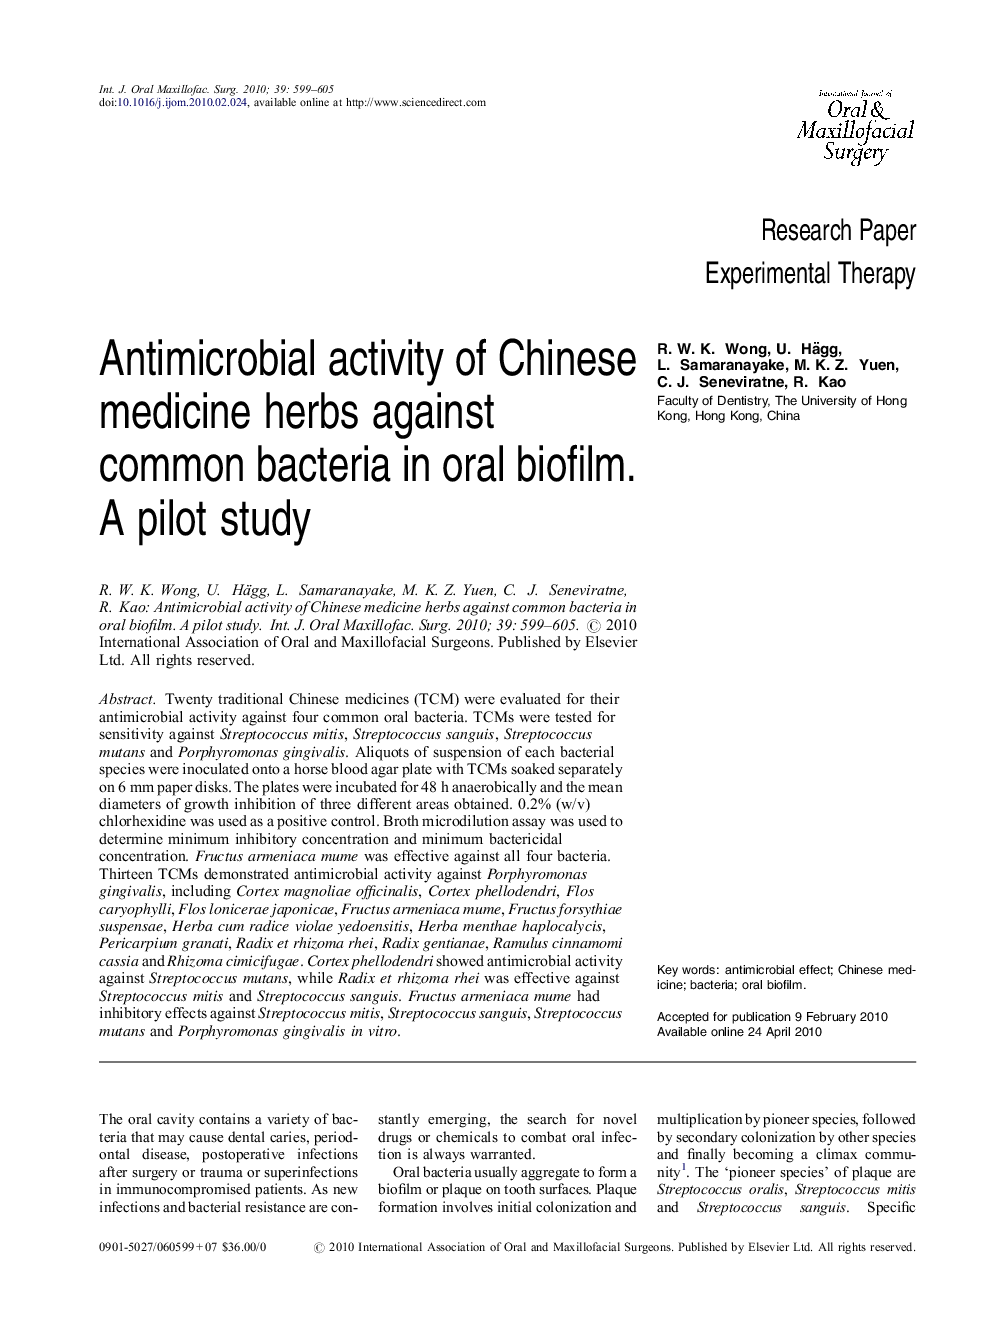 Antimicrobial activity of Chinese medicine herbs against common bacteria in oral biofilm. A pilot study